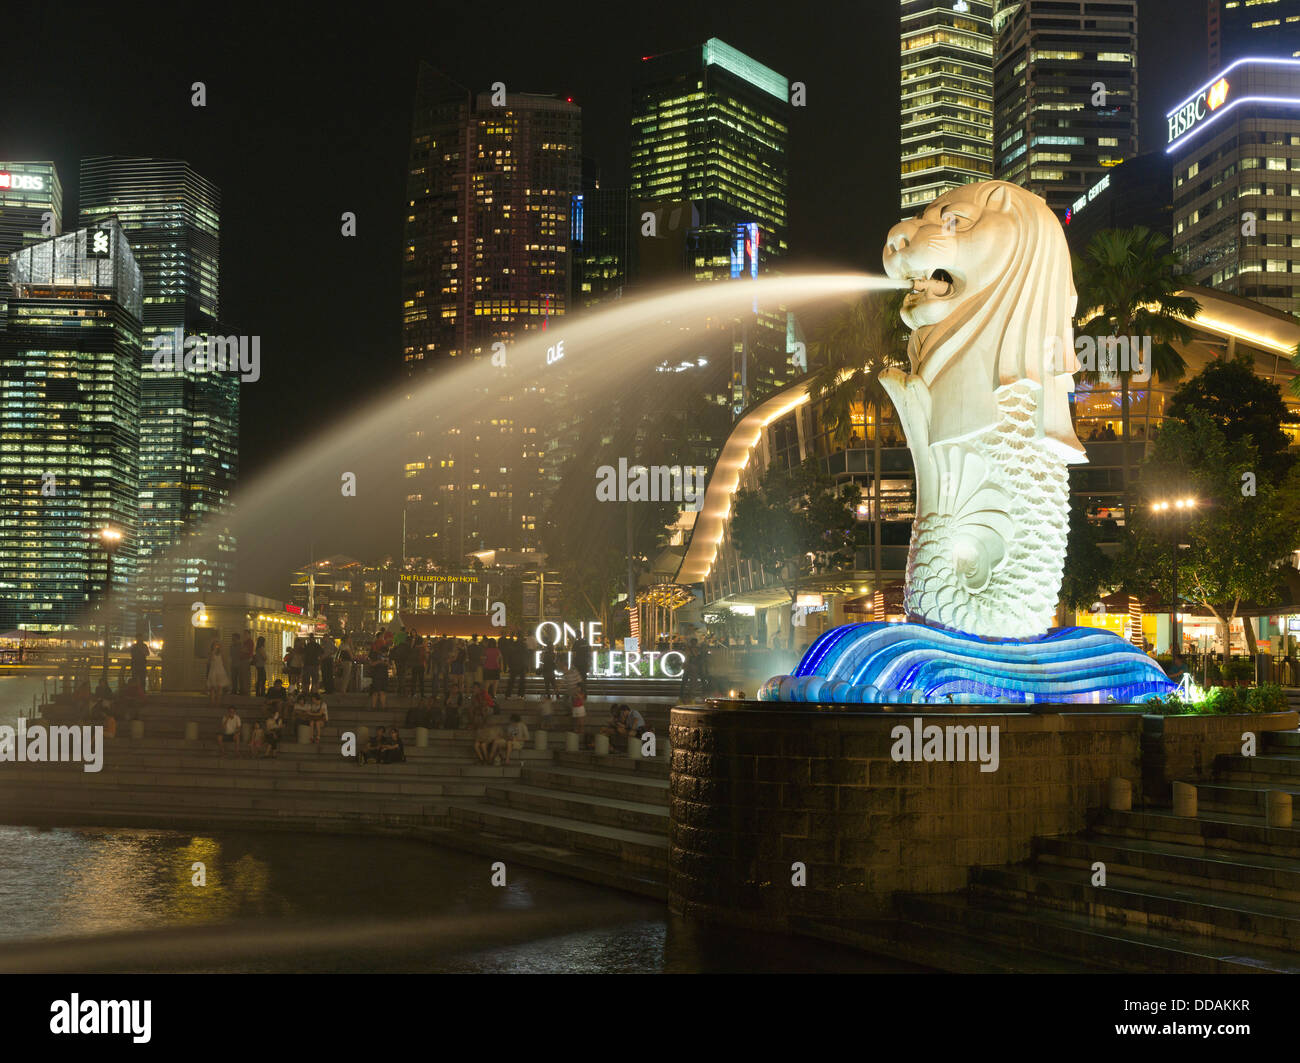 dh Merlion Park MARINA BAY SINGAPORE Merlion statue night time lights city skyscappers fountain Stock Photo